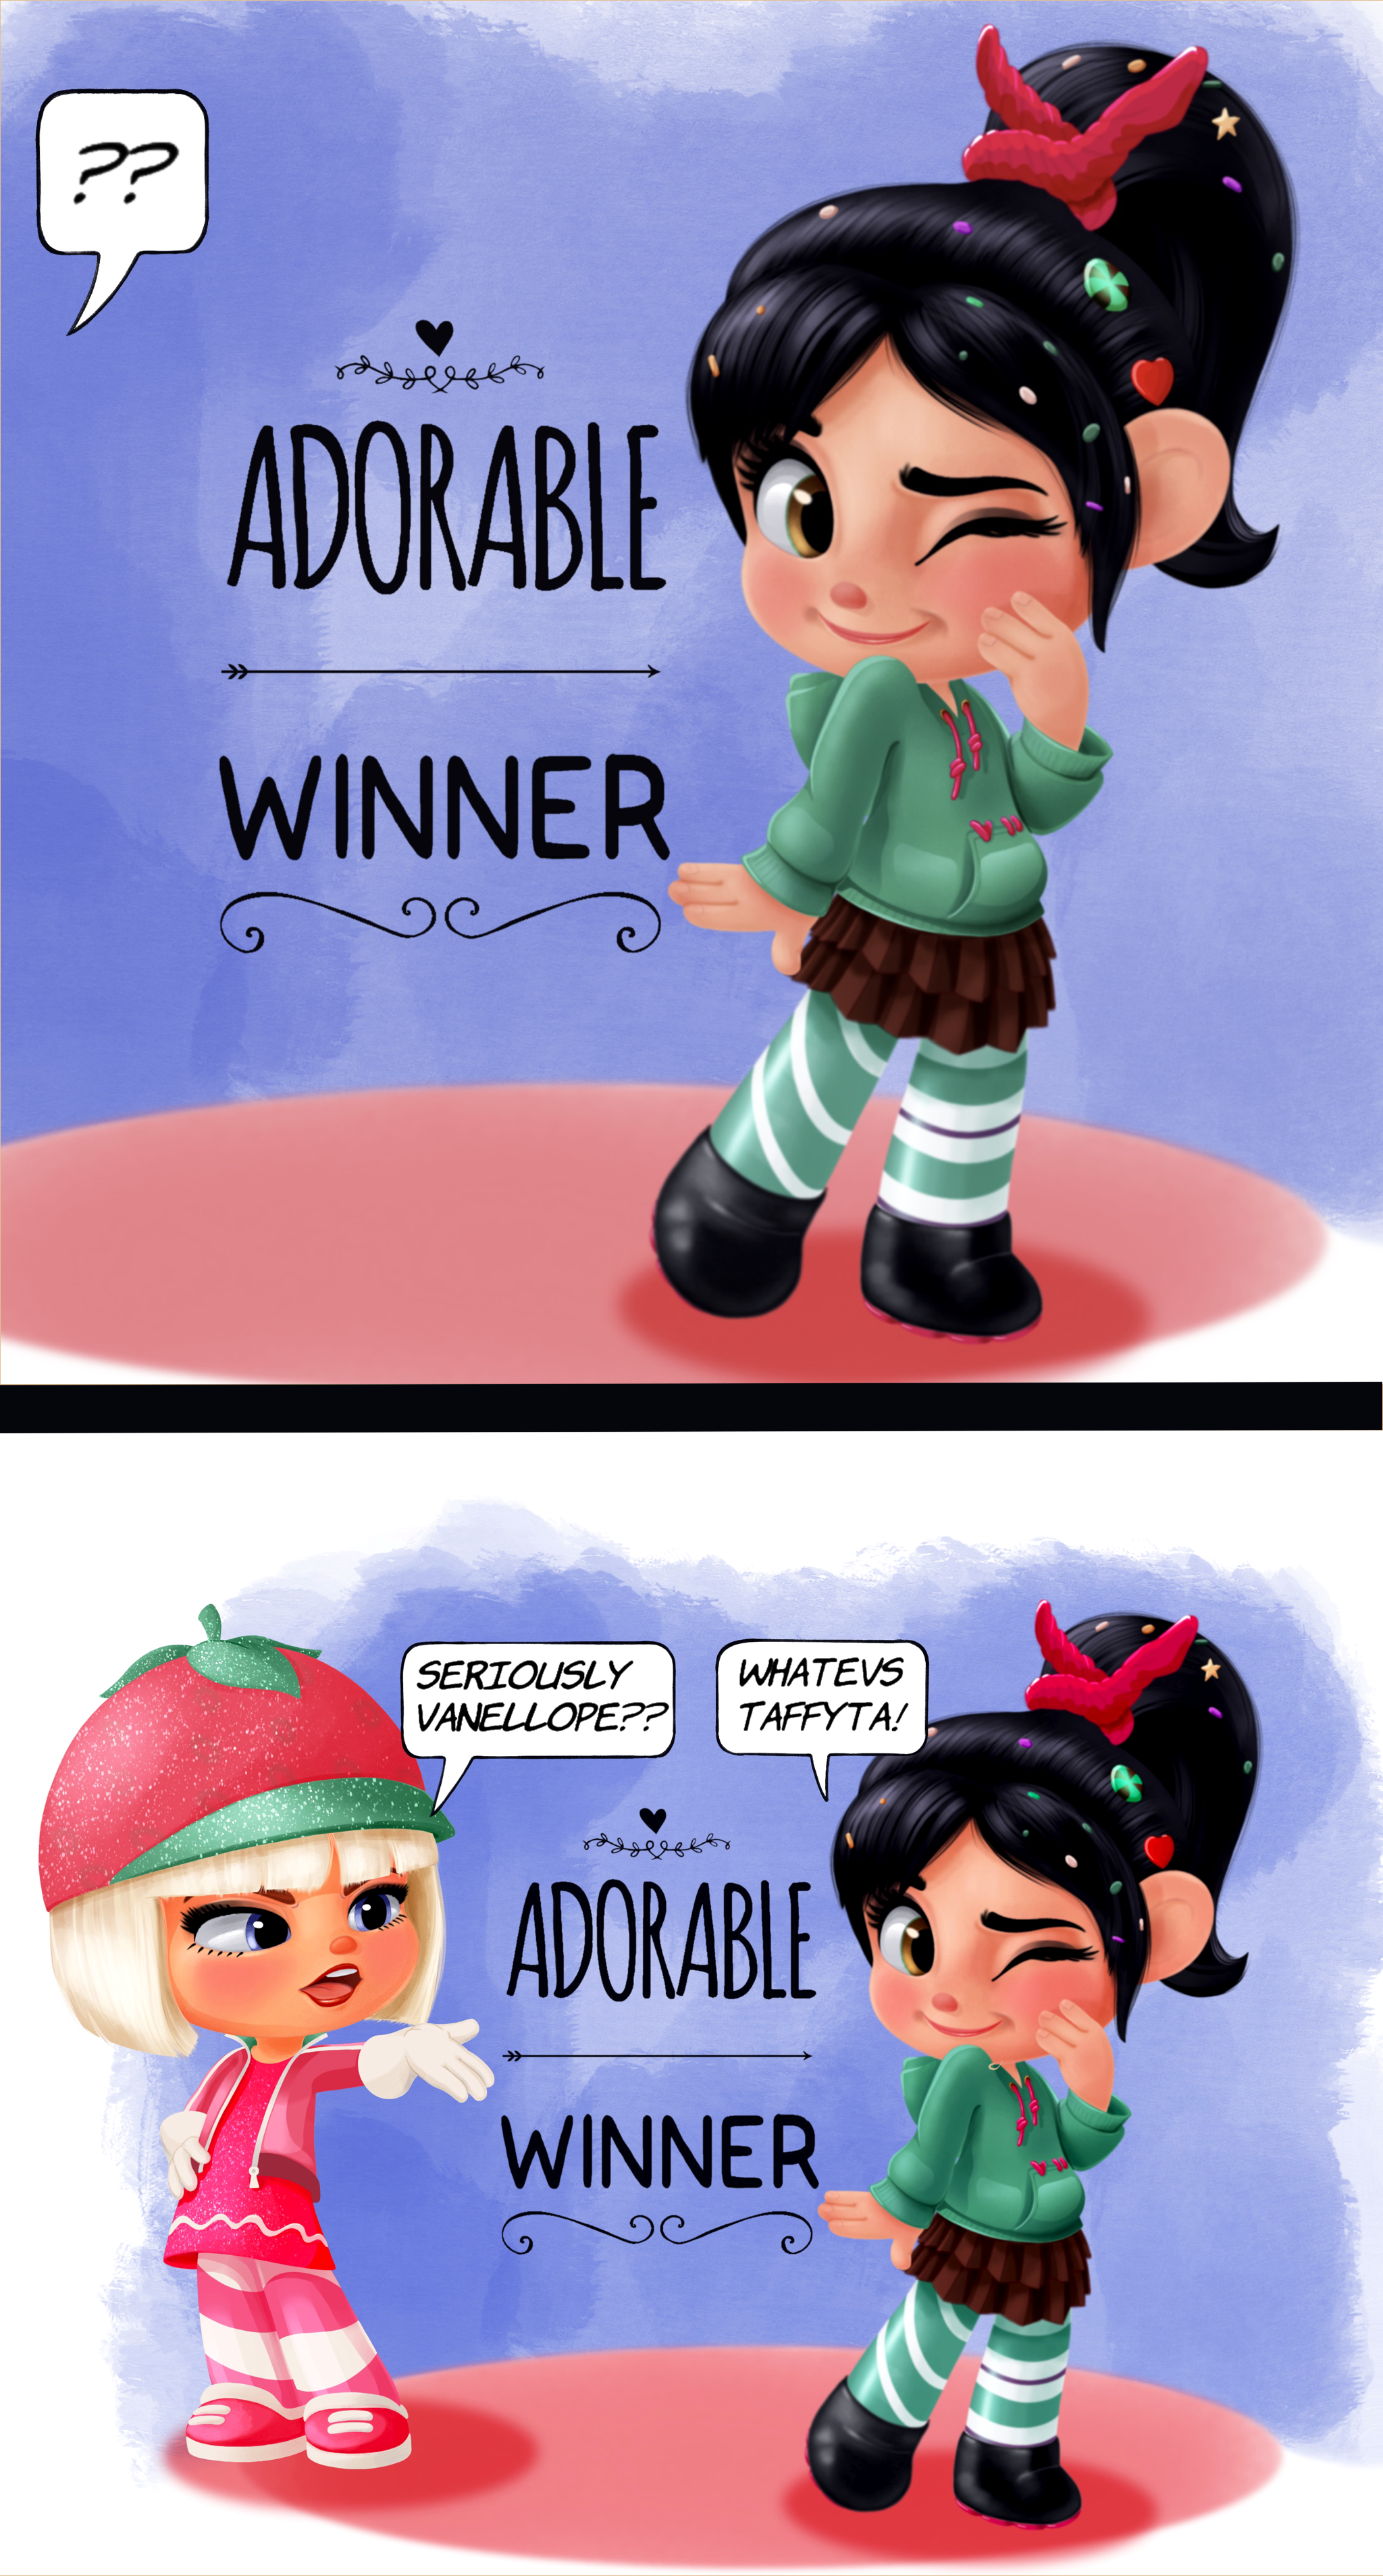 Taffyta and Vanellope - Princess Envy by artistsncoffeeshops on ...